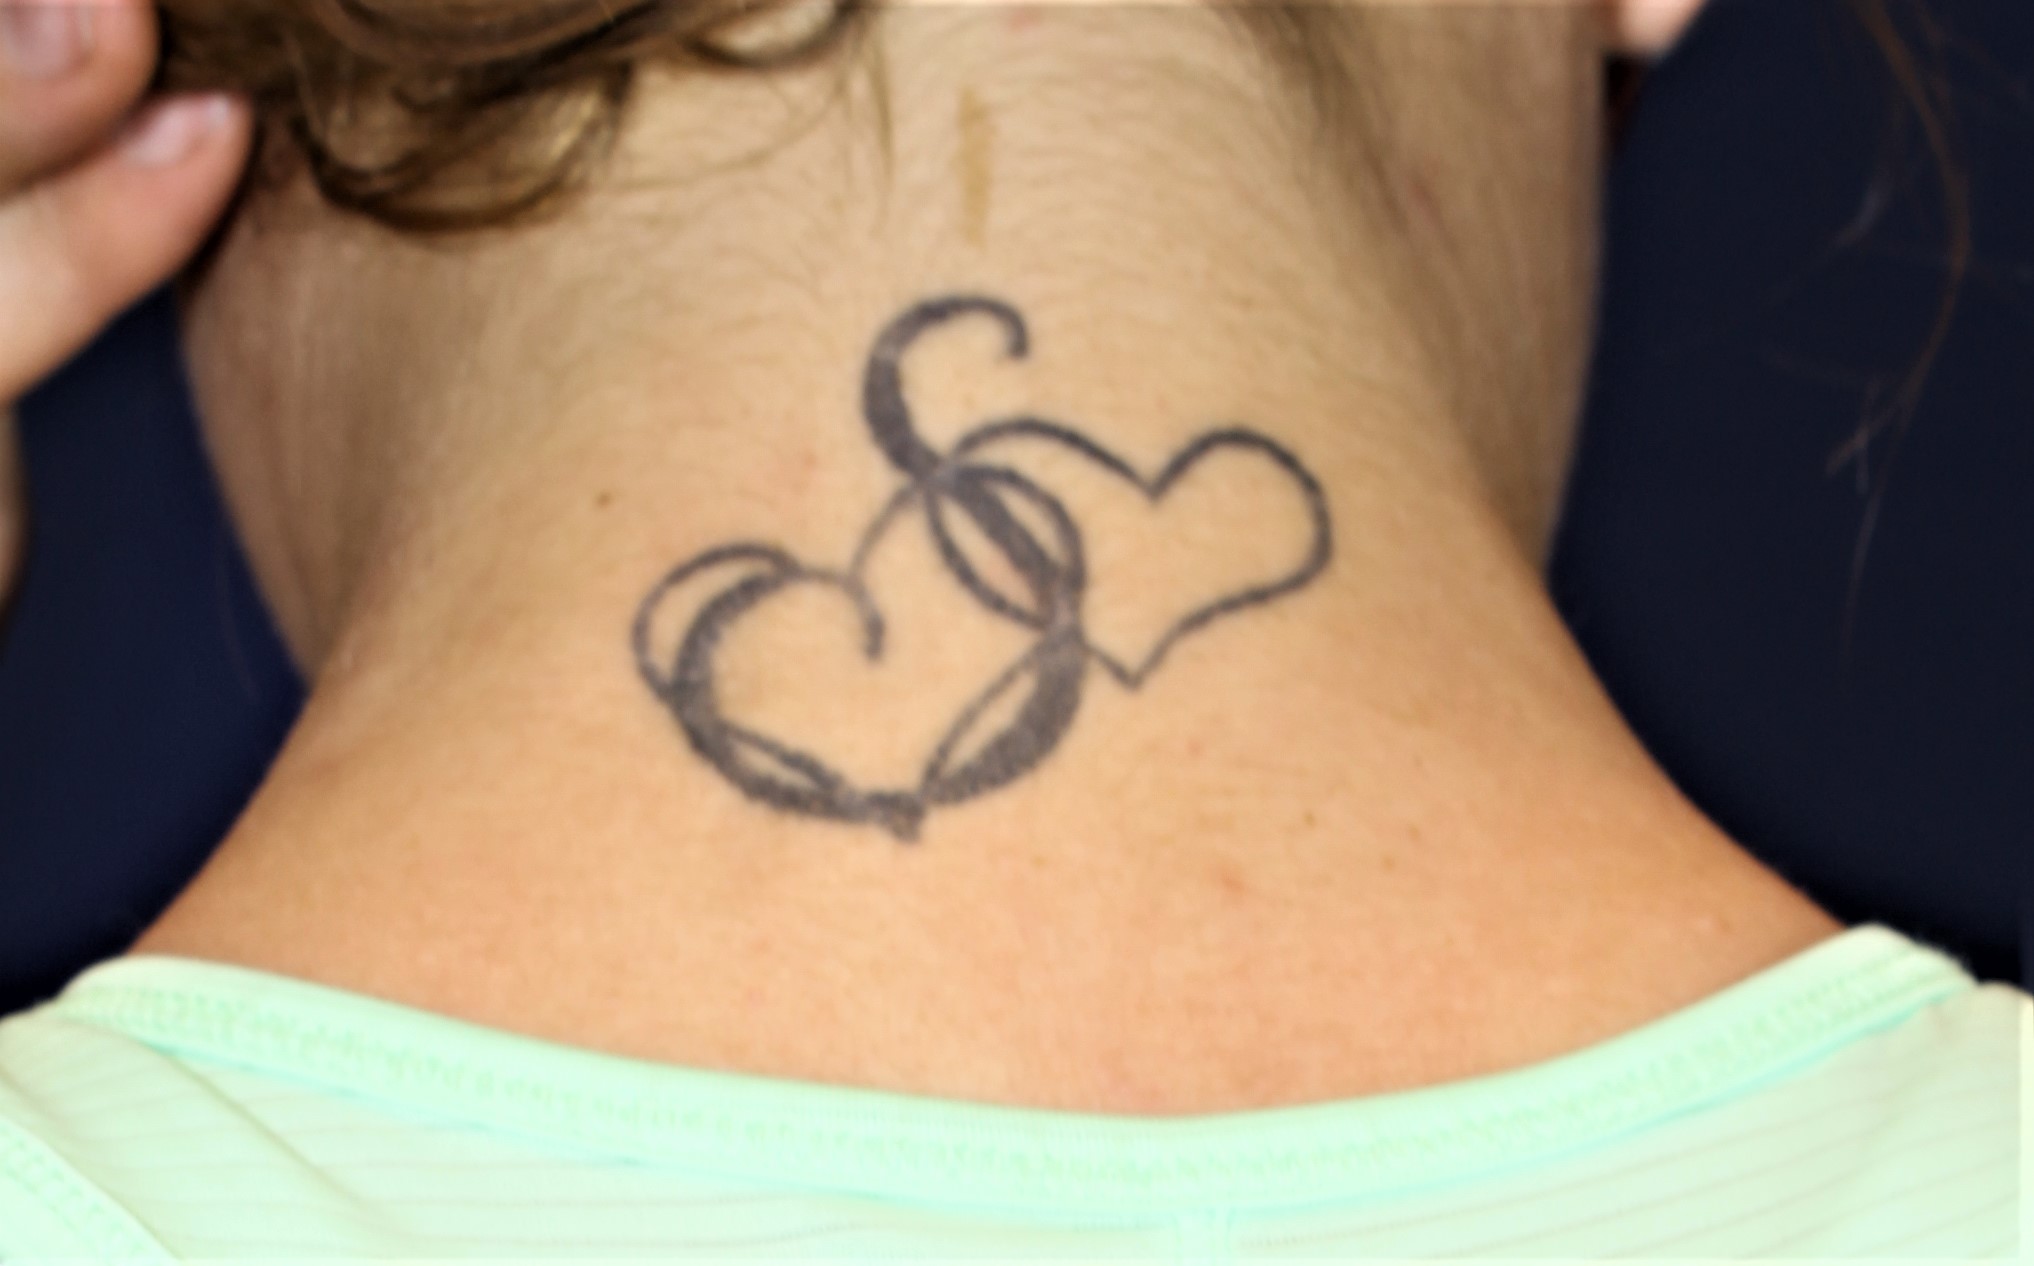 Tattoo Removal - Before & After Images